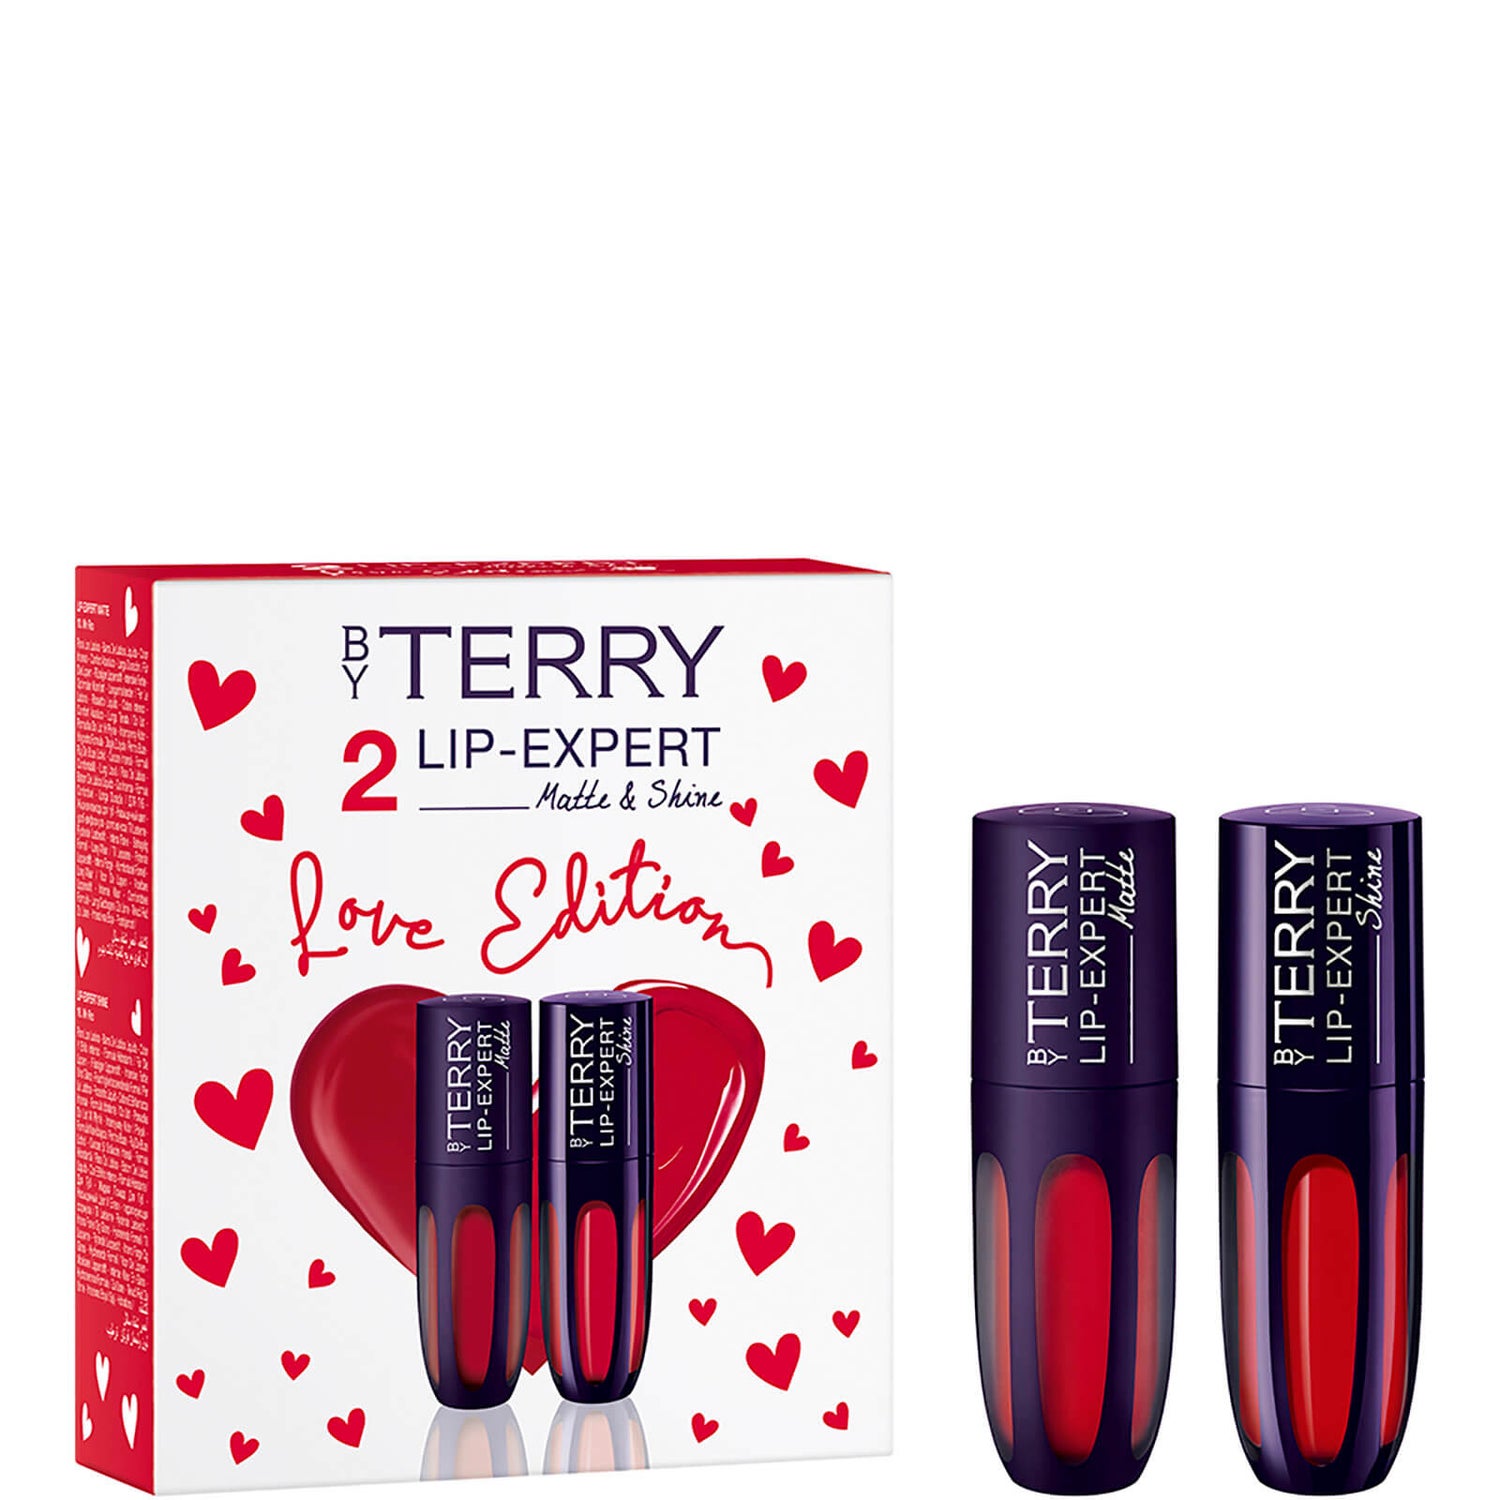 By Terry Lip-Expert Duo Set